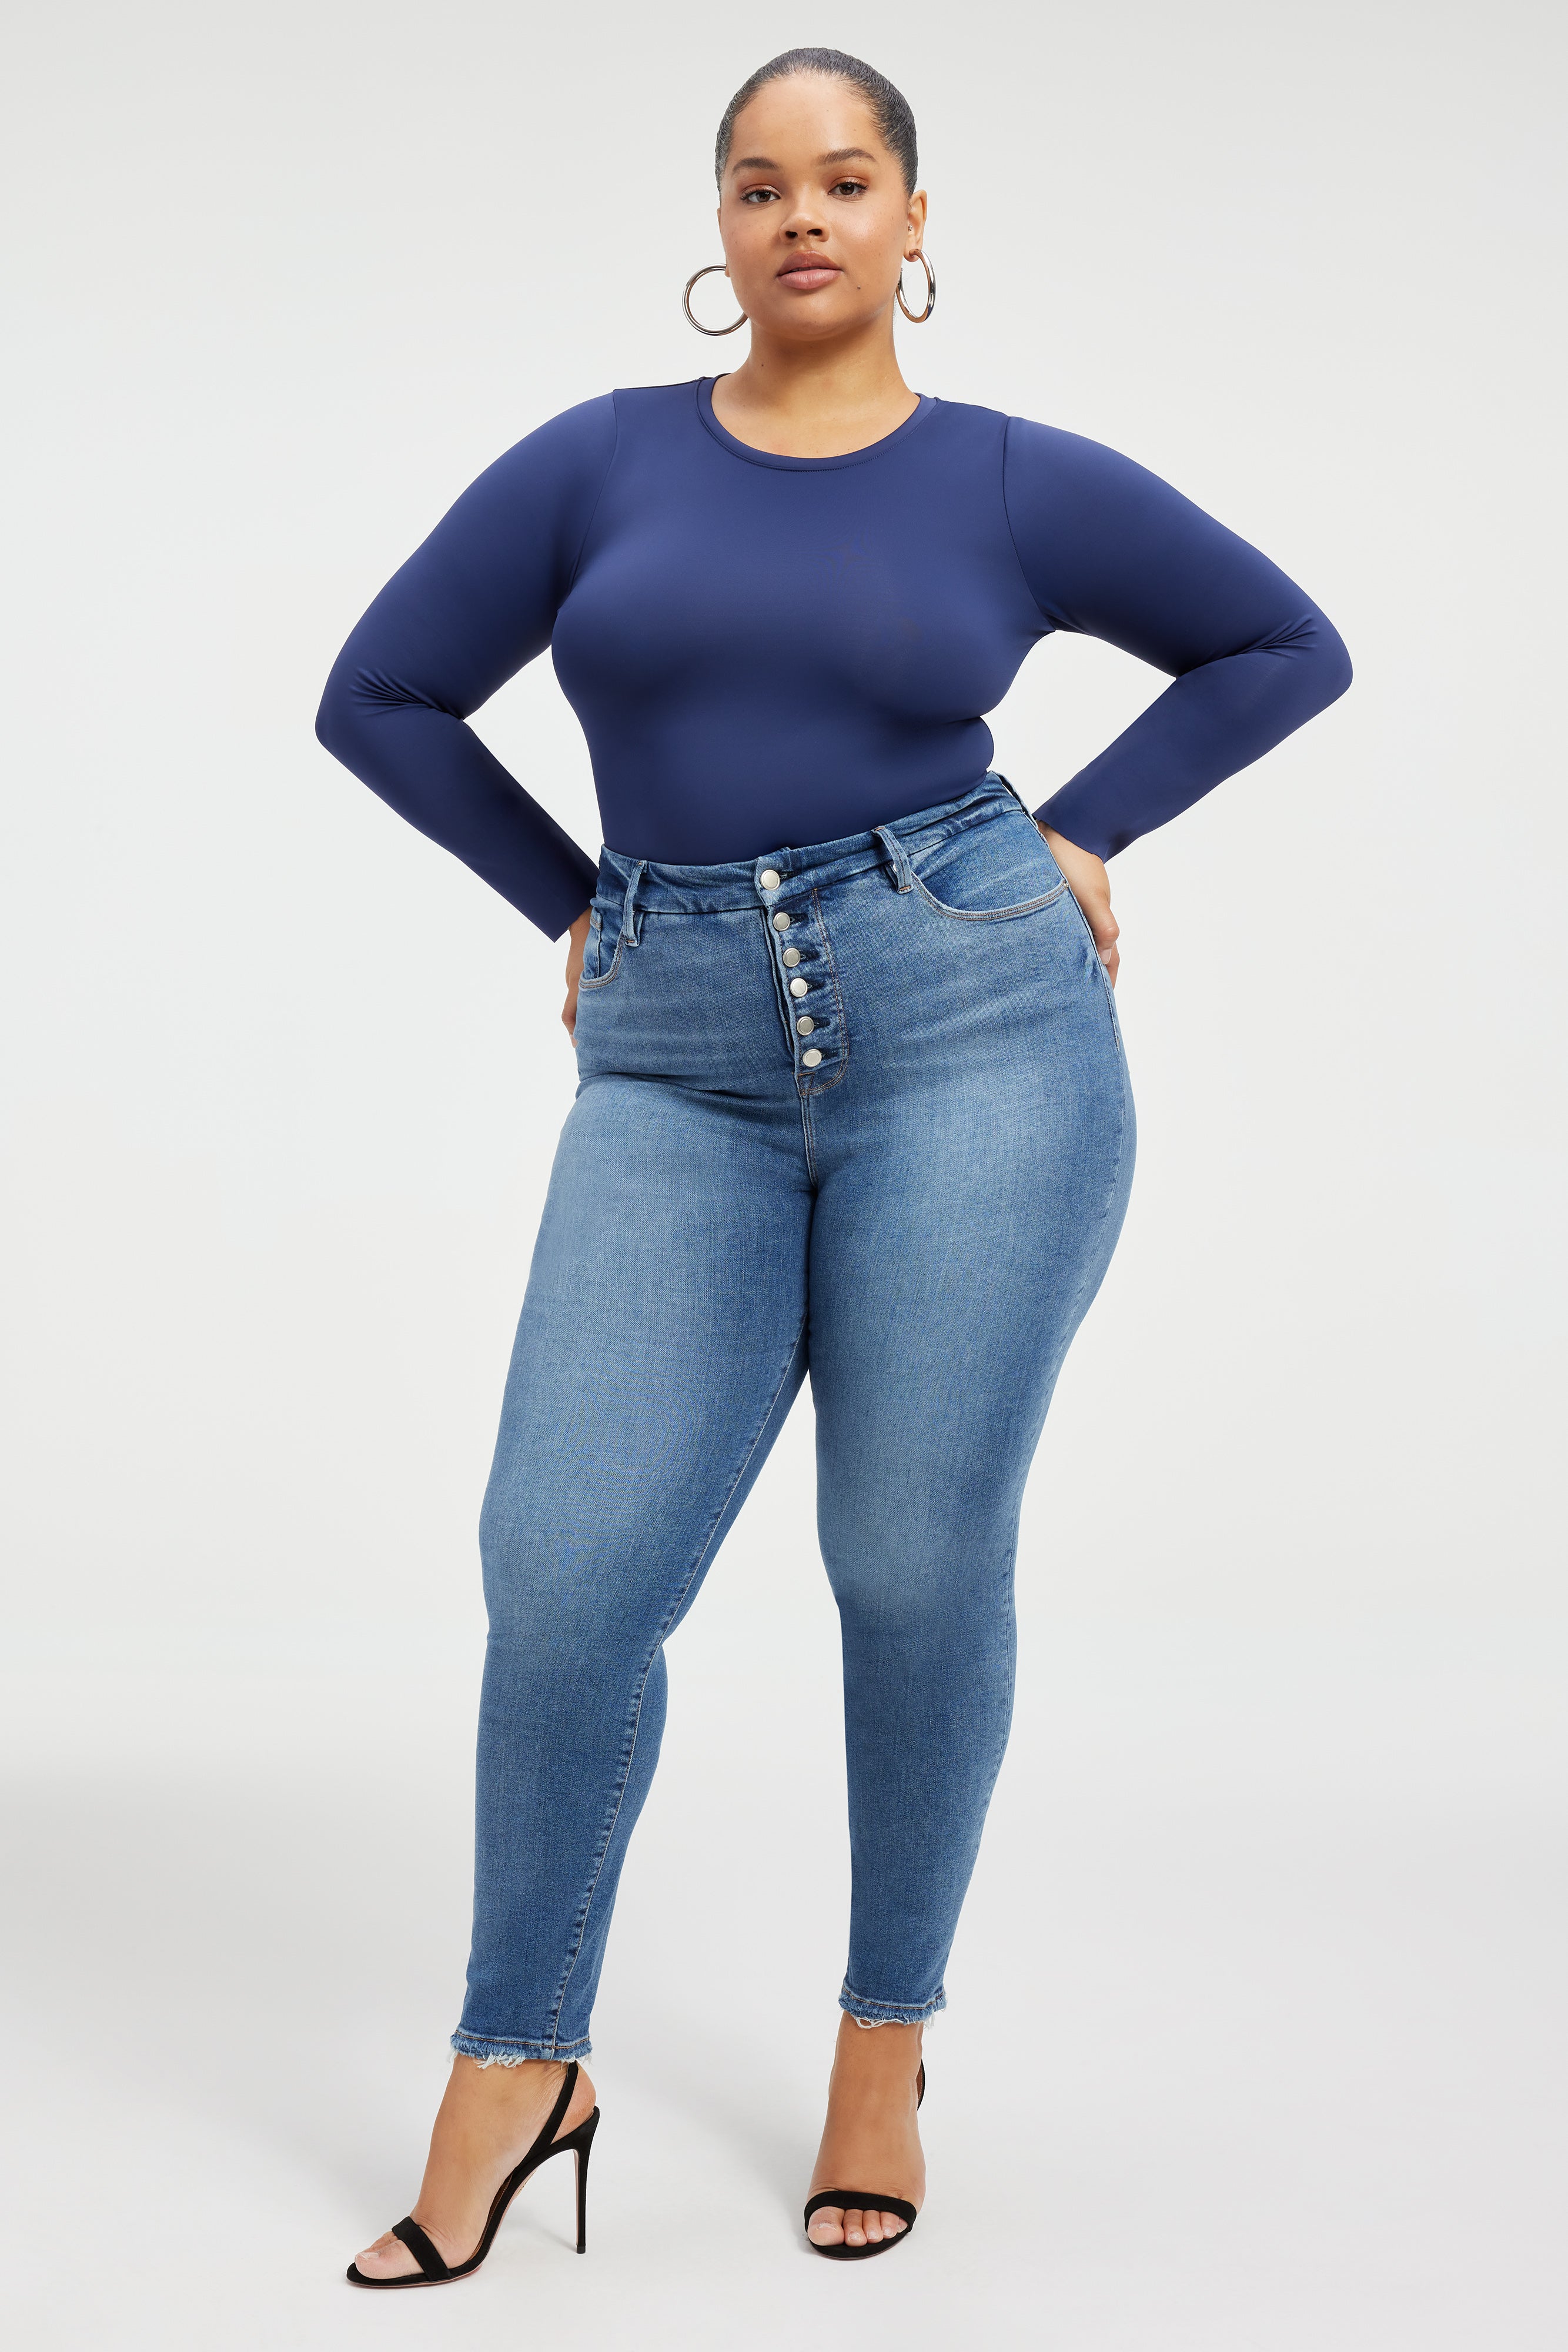 træ plan Presenter The 24 Best Curvy Jeans for Women That Fit So Well | Who What Wear